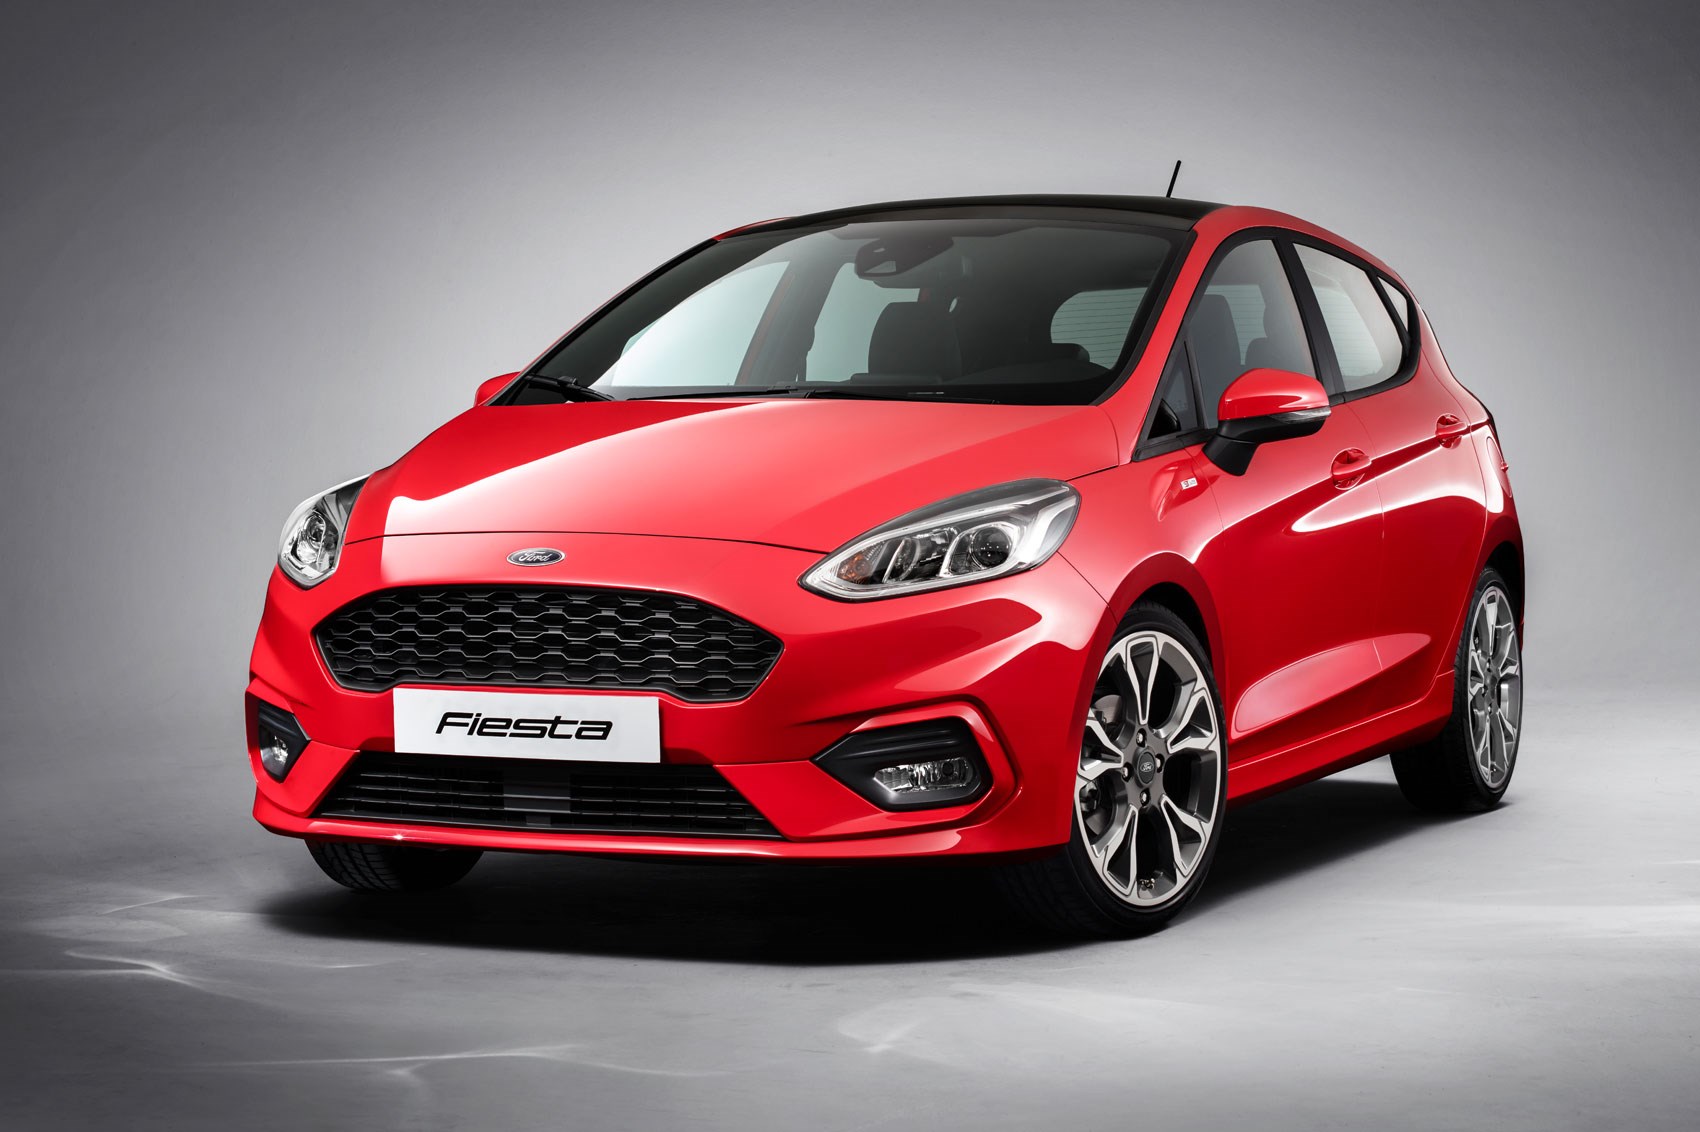 New 2017 Ford Fiesta: Mk7 supermini pricing and pictures